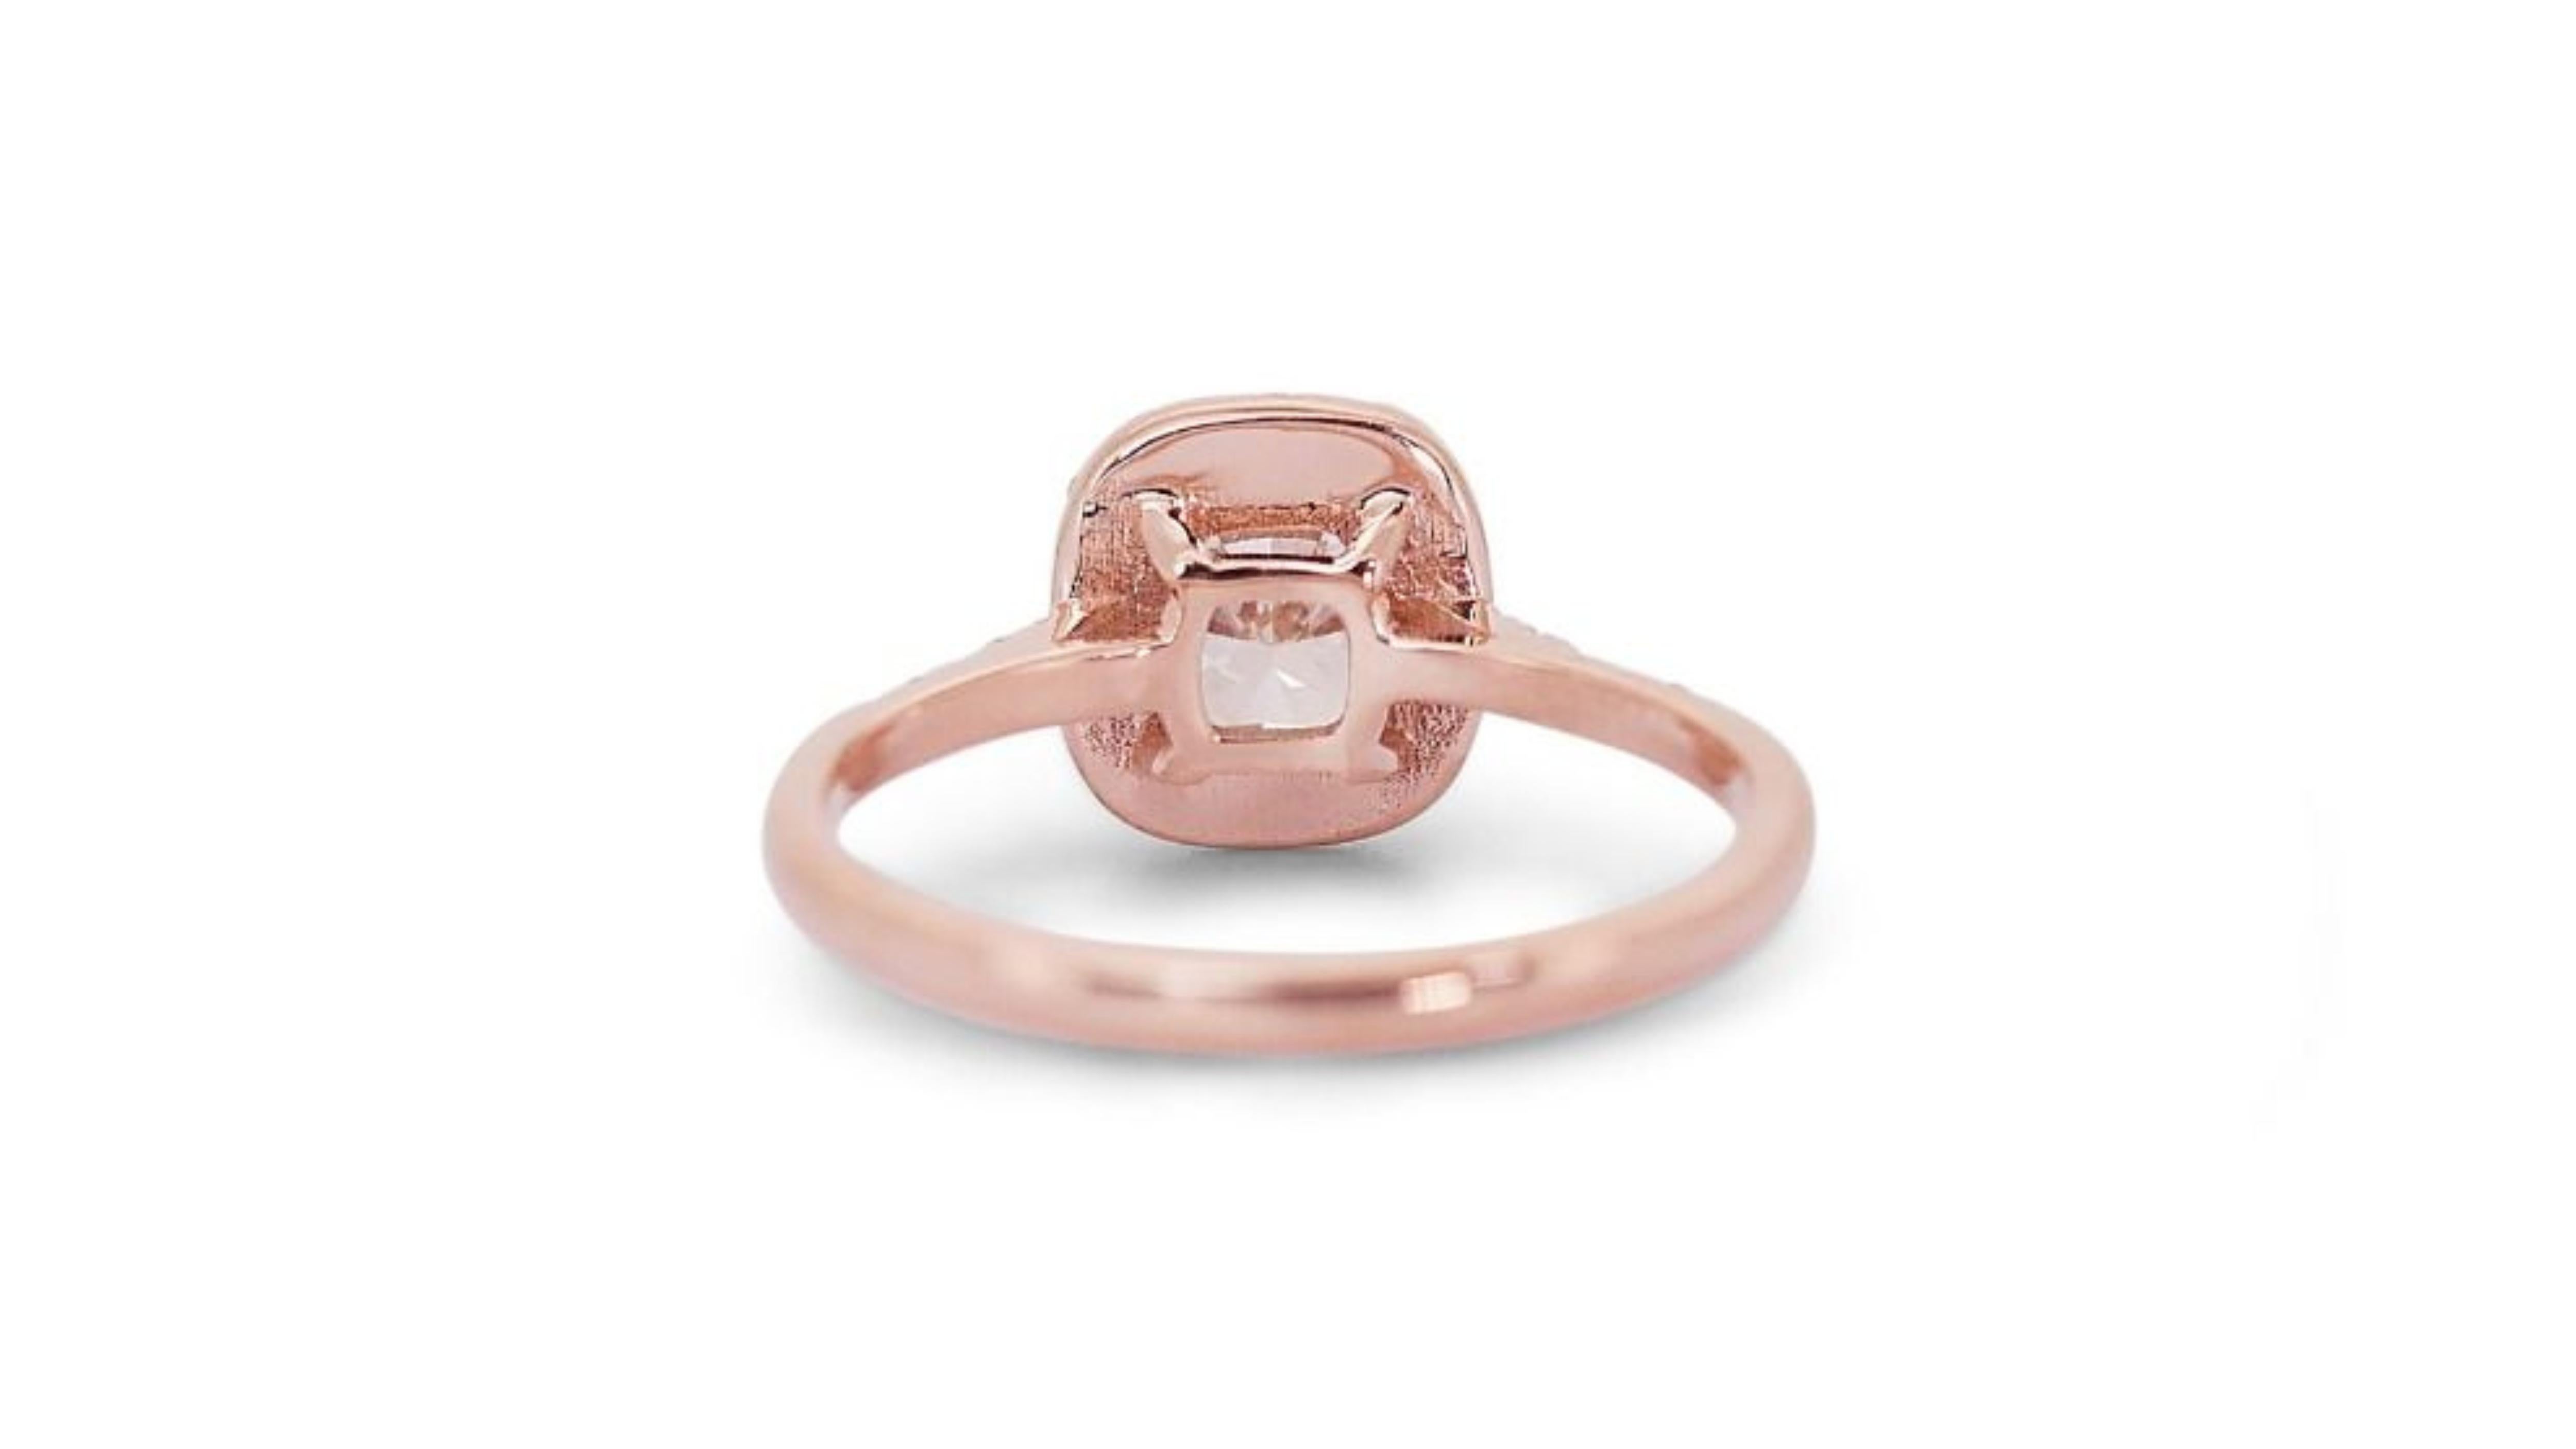 Stunning 18K Rose Gold Ring with Dazzling 1 carat Cushion Shape Natural Diamond For Sale 4